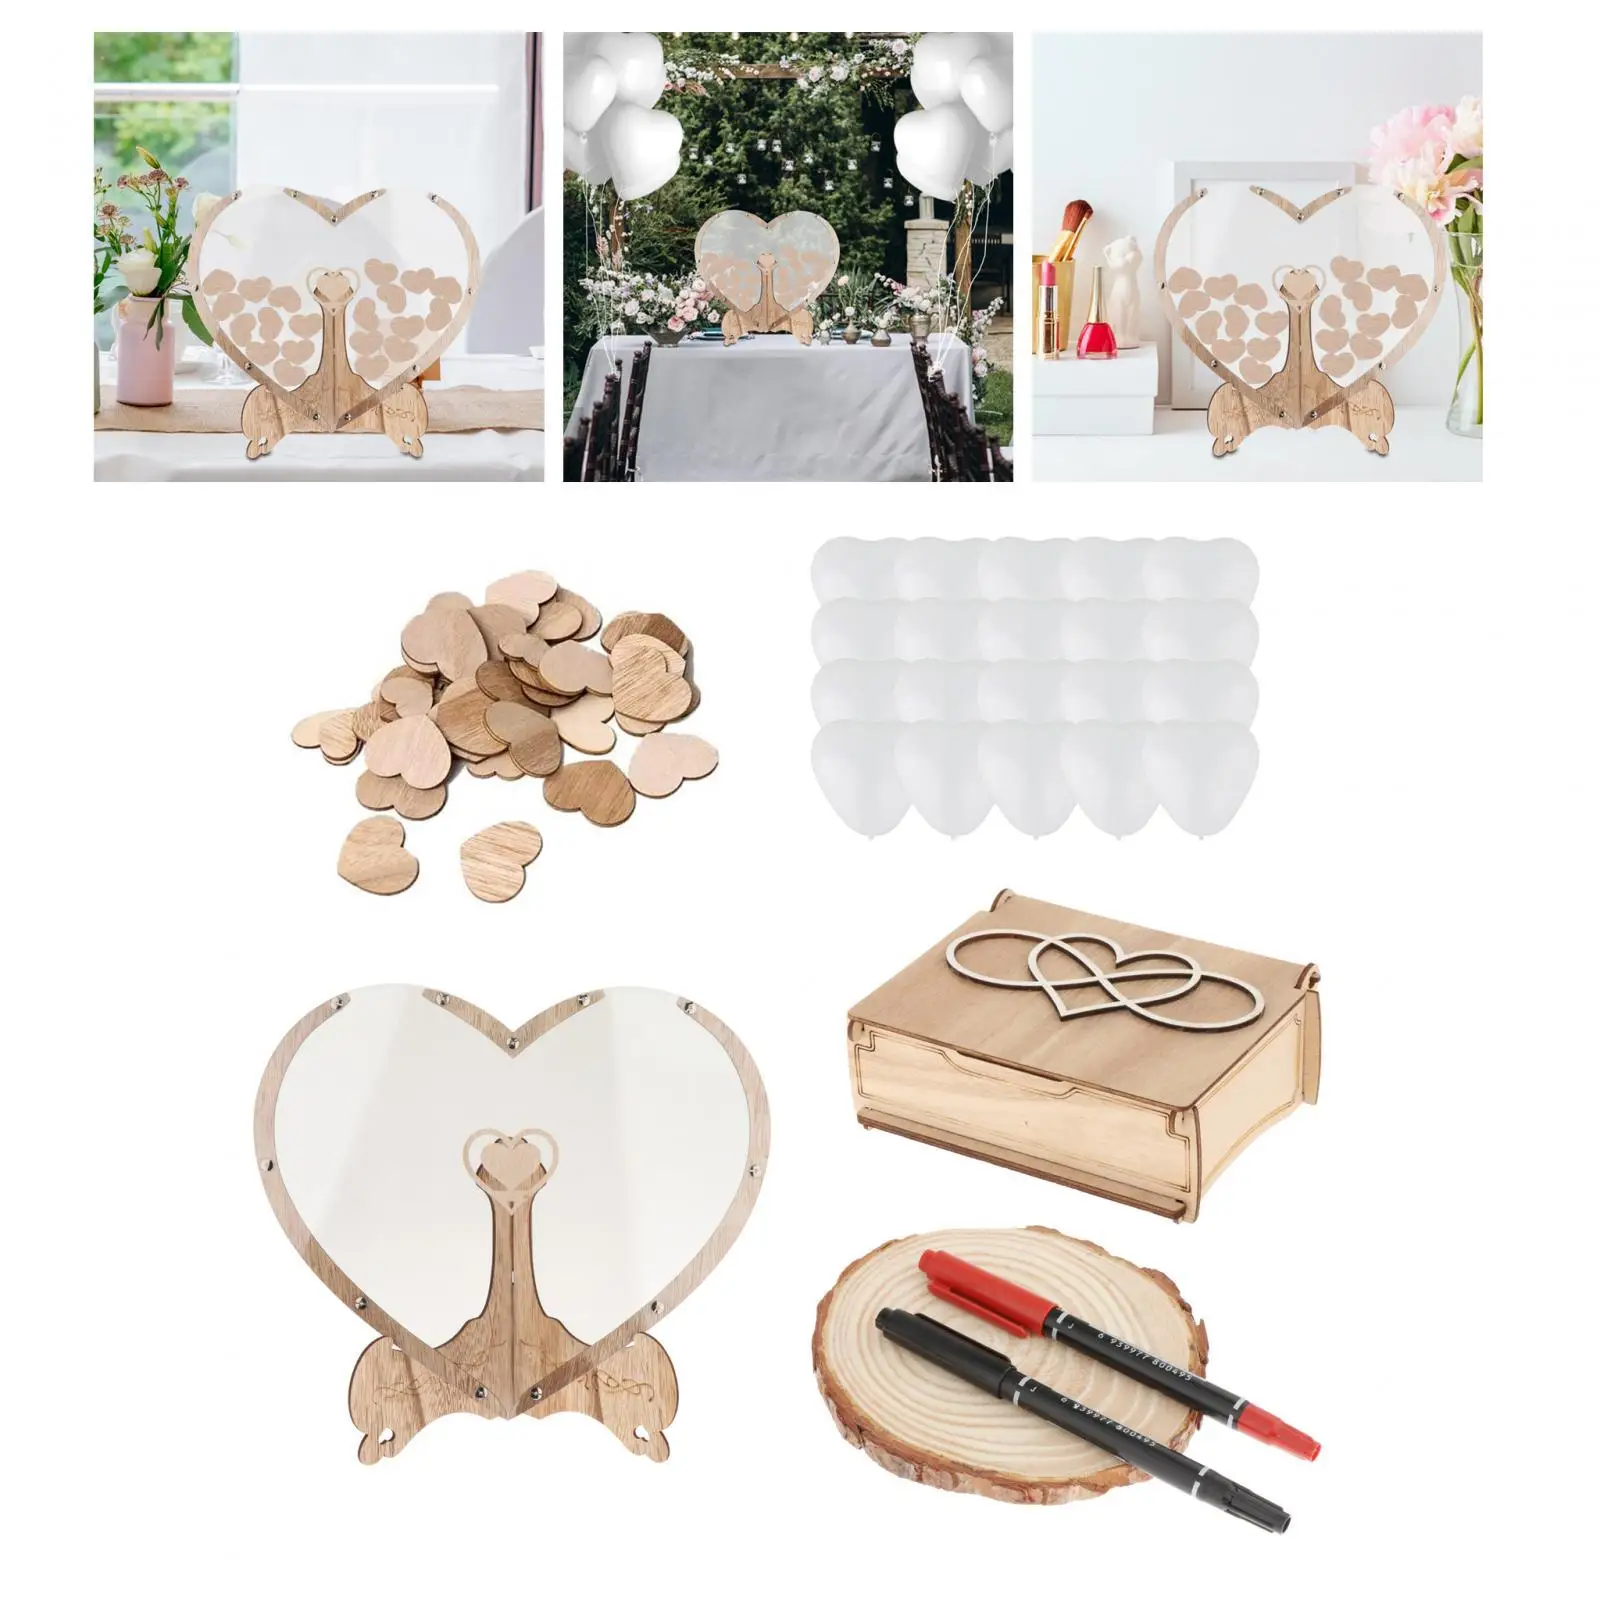 Heart Wedding Guest Book Wedding Guest Book for Party Decoration